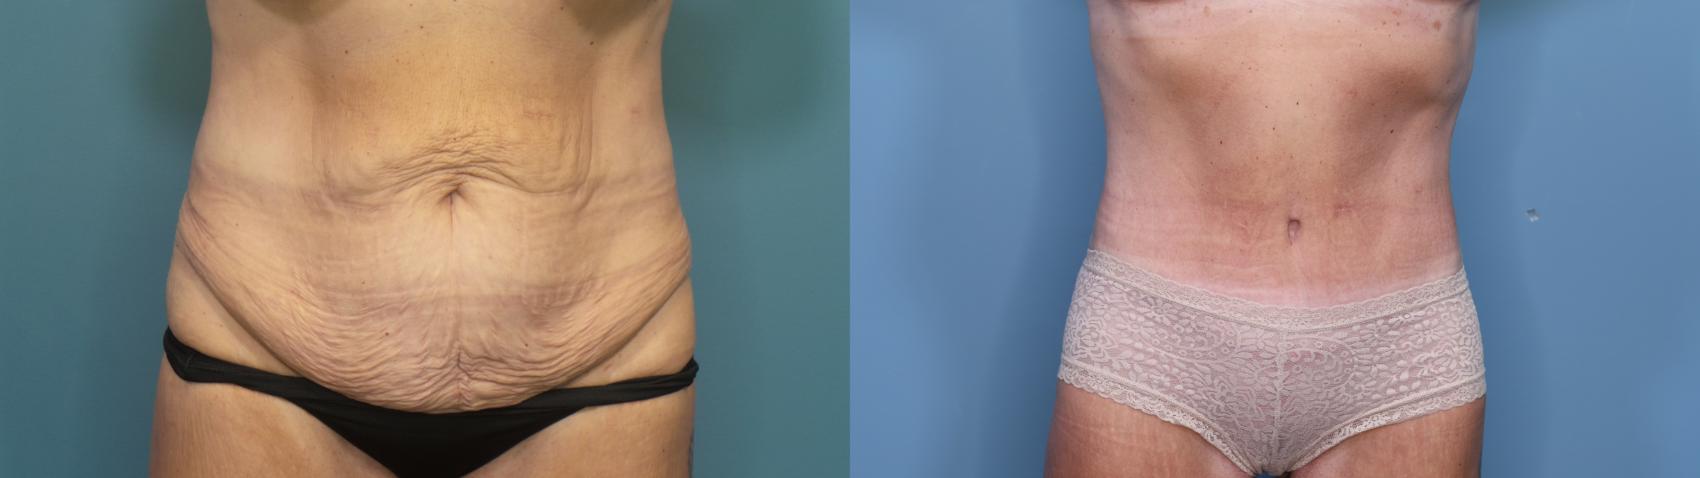 Before & After Tummy Tuck (Abdominoplasty) Case 355 Front View in Portland, OR